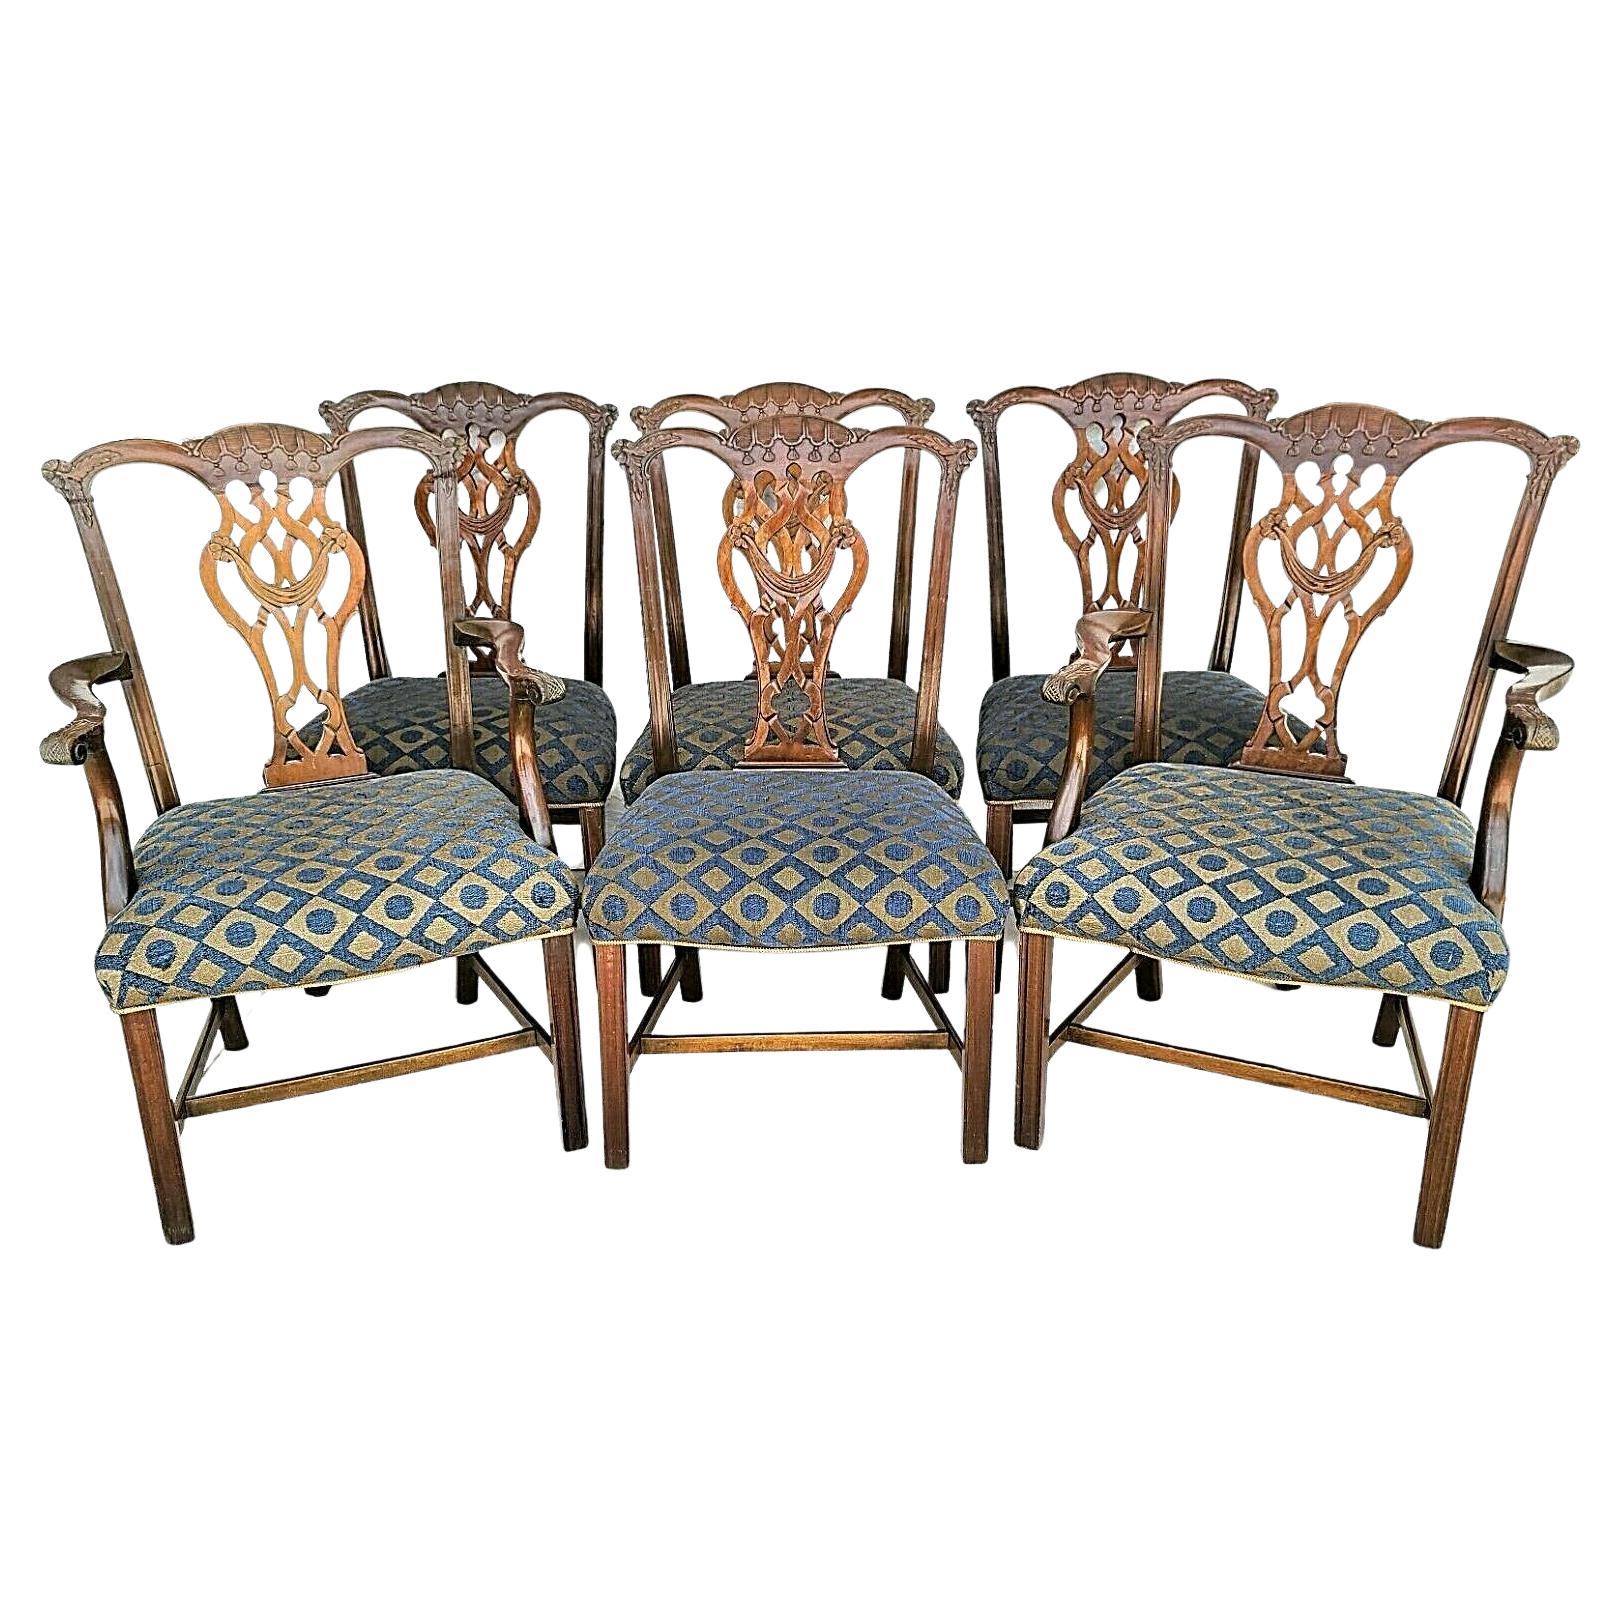 Vintage Chippendale Mahogany Dining Chairs Carved Tassels & Drapery, Set 6 For Sale